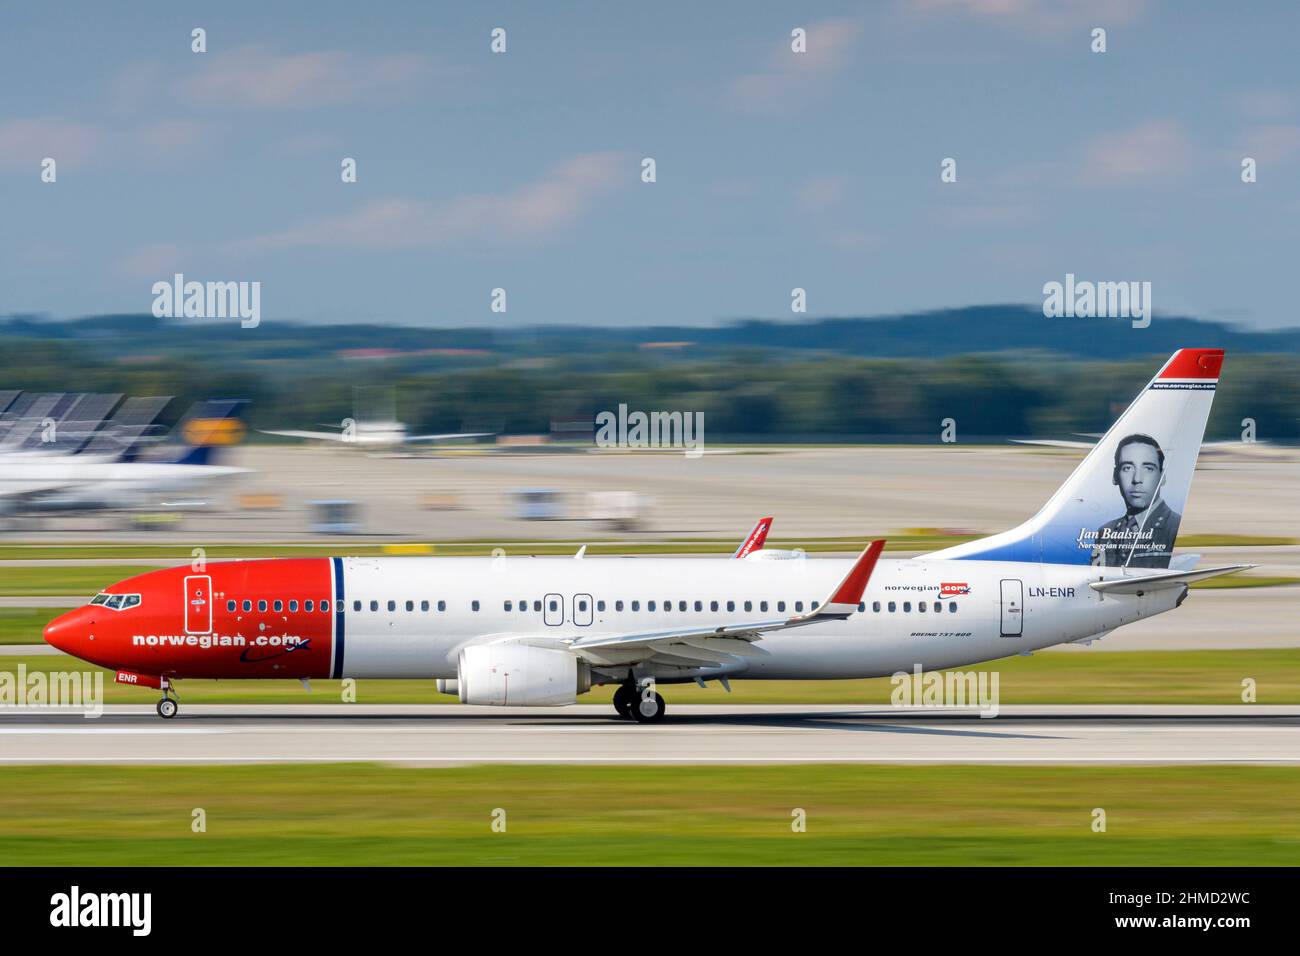 Norwegian Air Shuttle AOC Boeing 737-8JP With The Aircraft Registration LN-ENR Is Starting On The Southern Runway 26L Of The Munich Airport MUC EDDM Stock Photo